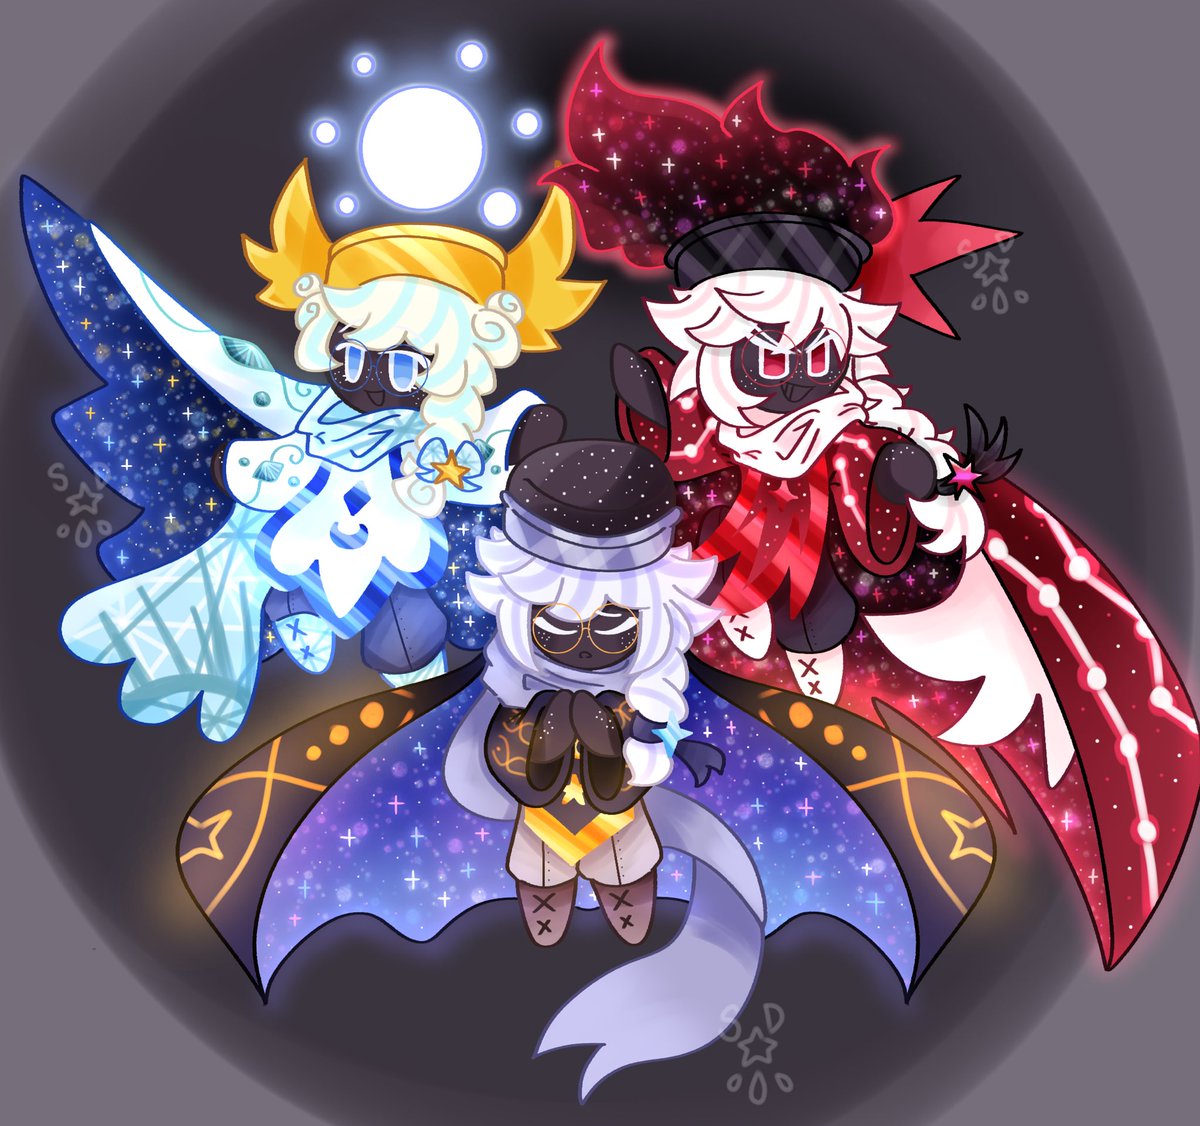 I made costumes for my OC as there was an event going on in the Seamoon server! They are inspired of Moonlight’s Blissful Full Moon and Alluring Crescent costumes! Here we have Cosmic Soufflé Cookie! The left is Wishful Messenger and the right is Fallen Sorcerer! #cookierunoc